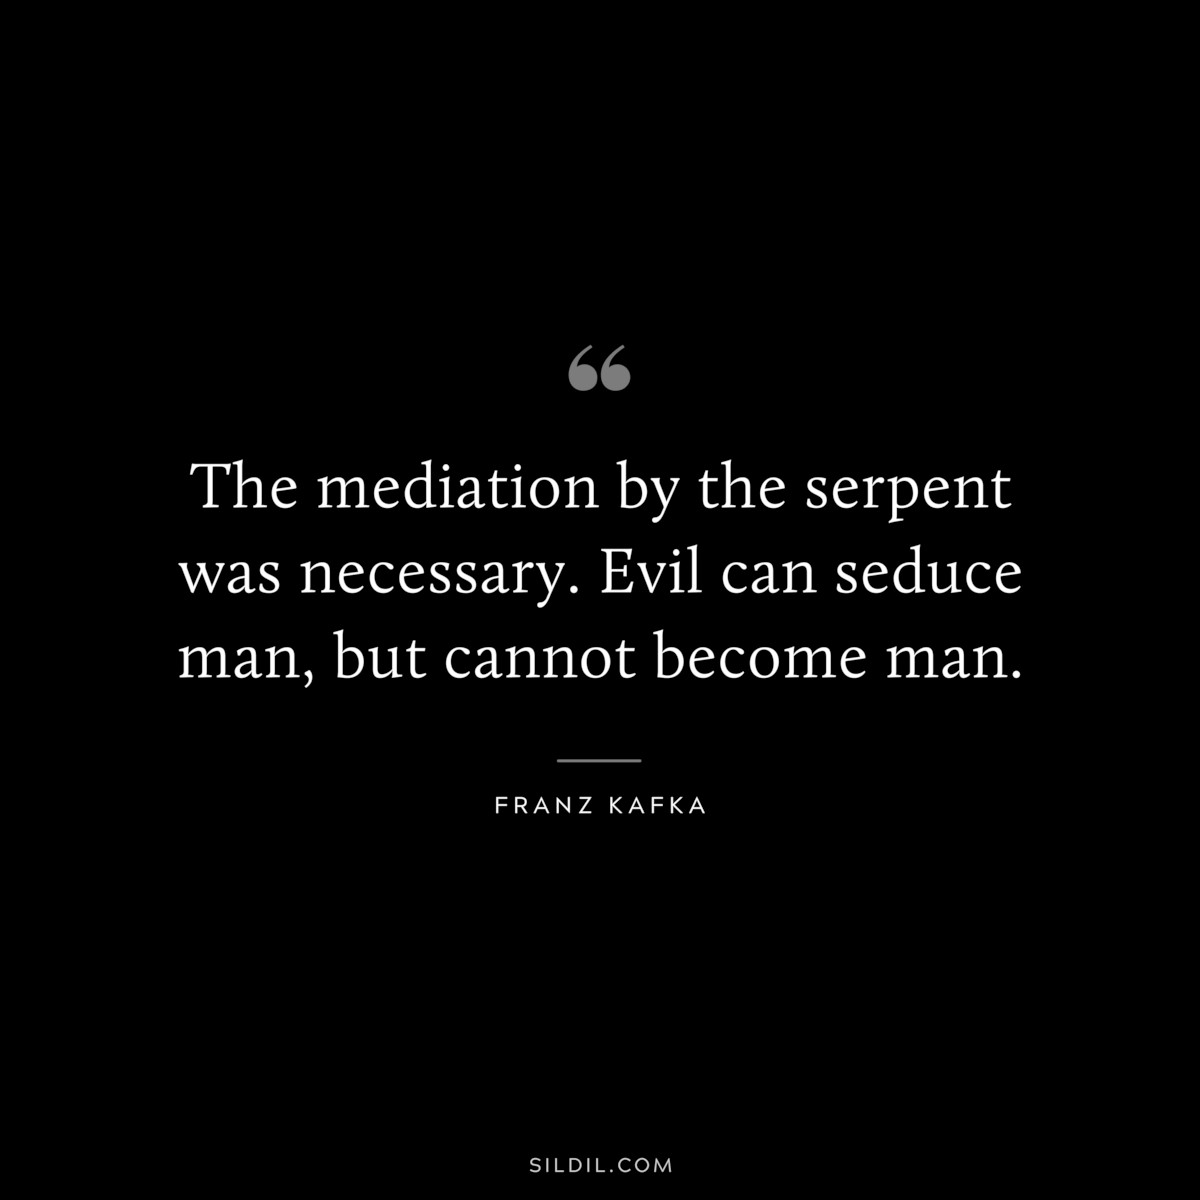 The mediation by the serpent was necessary. Evil can seduce man, but cannot become man. ― Franz Kafka